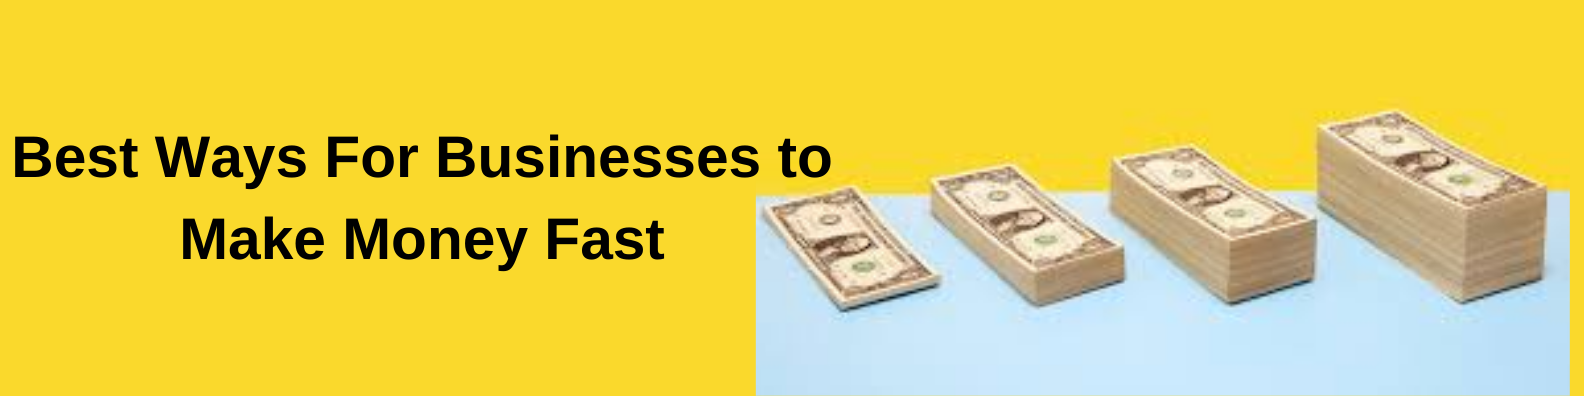 Best Ways For Businesses to Make Money Fast